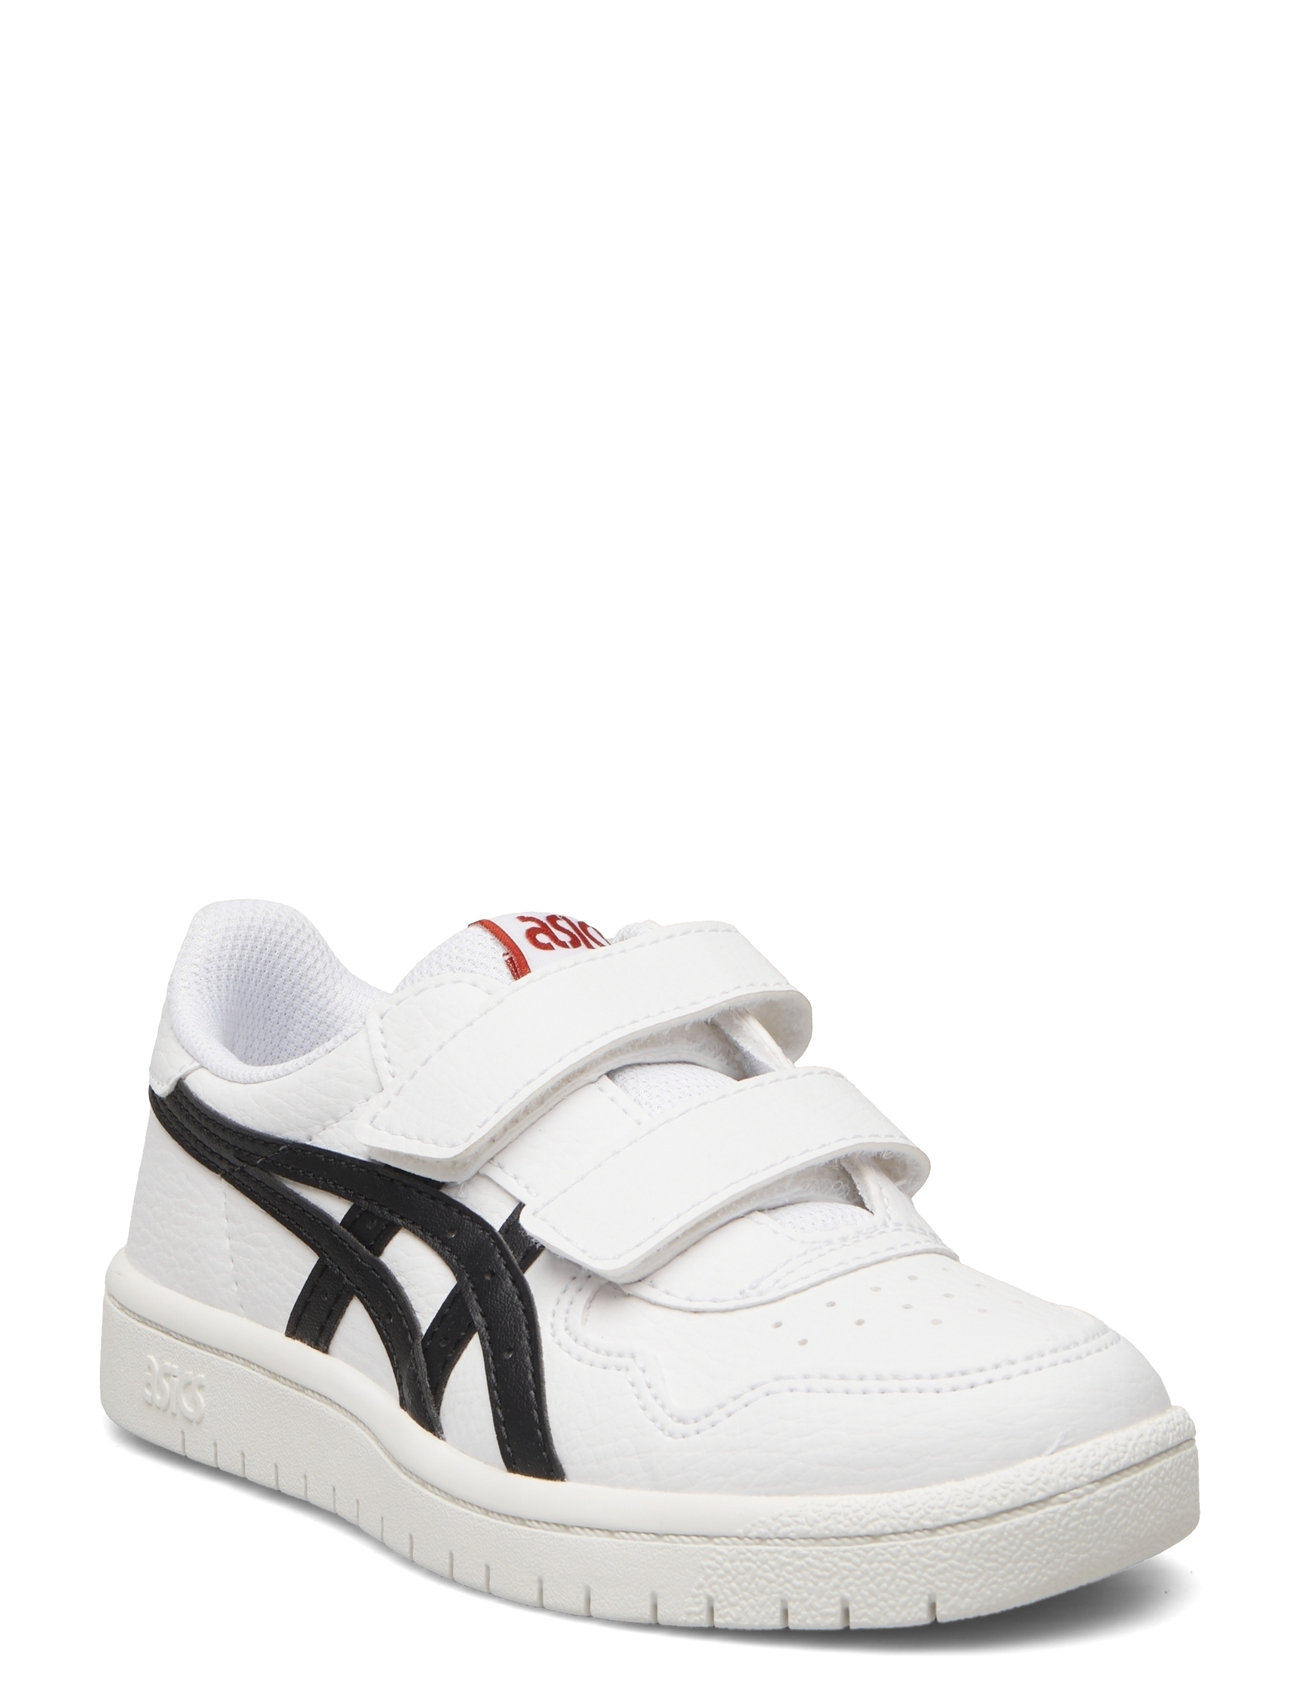 Asics "Japan S Ps Sport Sneakers Low-top White Asics"